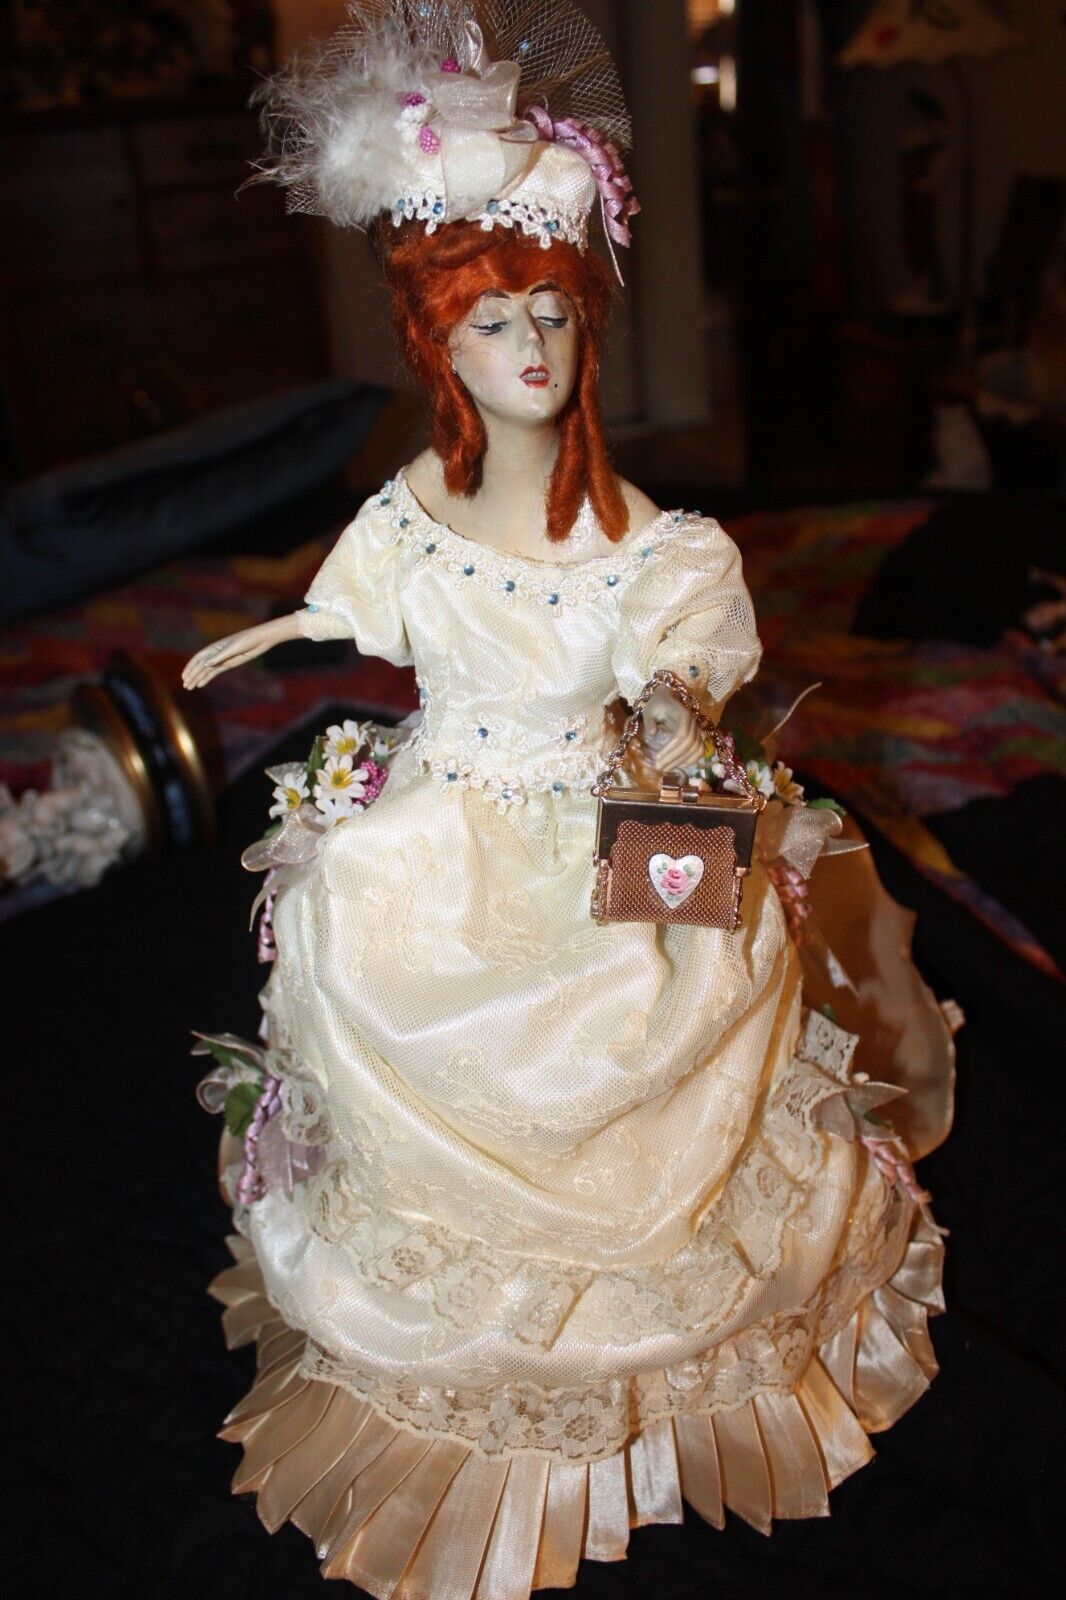 OOAK Victorian Artist Doll with Red Hair Dressed in an Elaborate Golden Ensemble